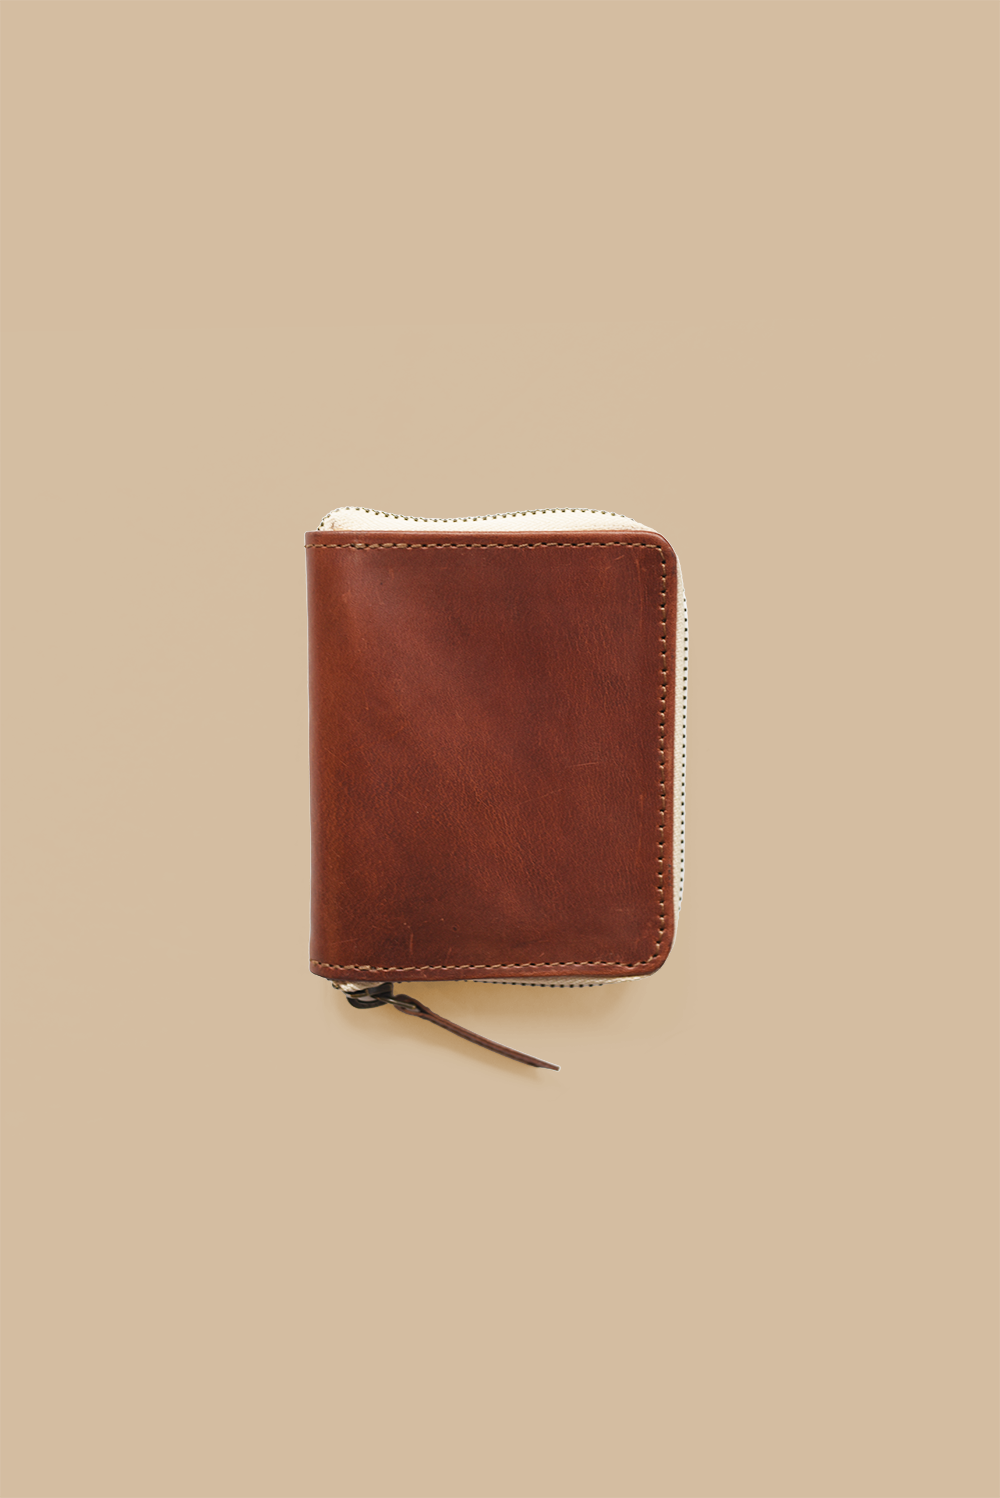 Chestnut Brown Buffalo Leather Zippered Wallet from India